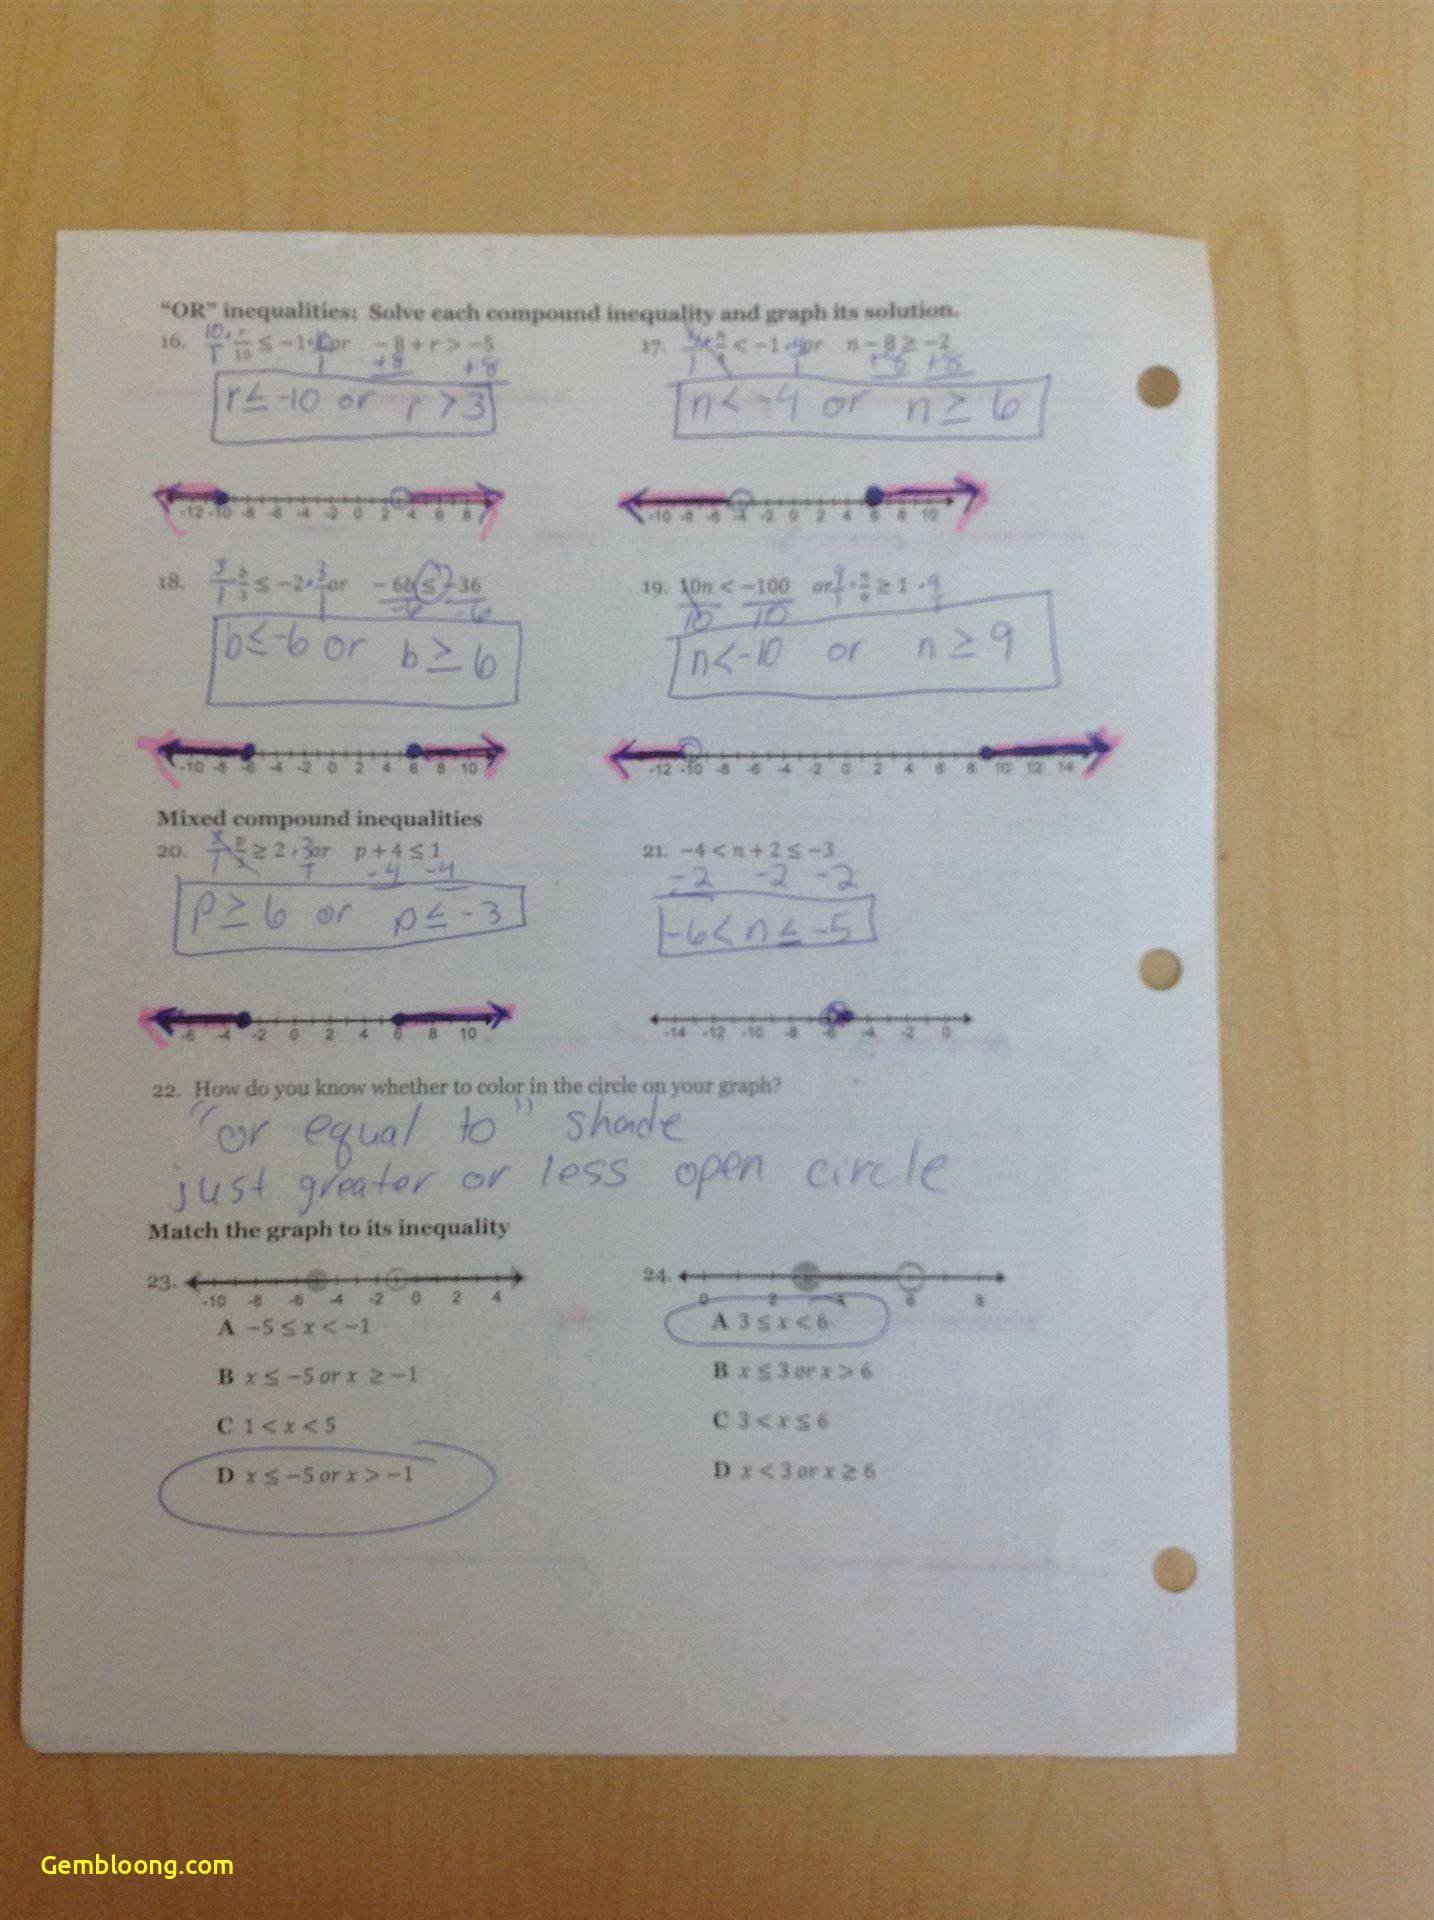 Compound Inequalities Worksheet Answers Awesome Pound Inequalities Worksheet Cramerforcongress